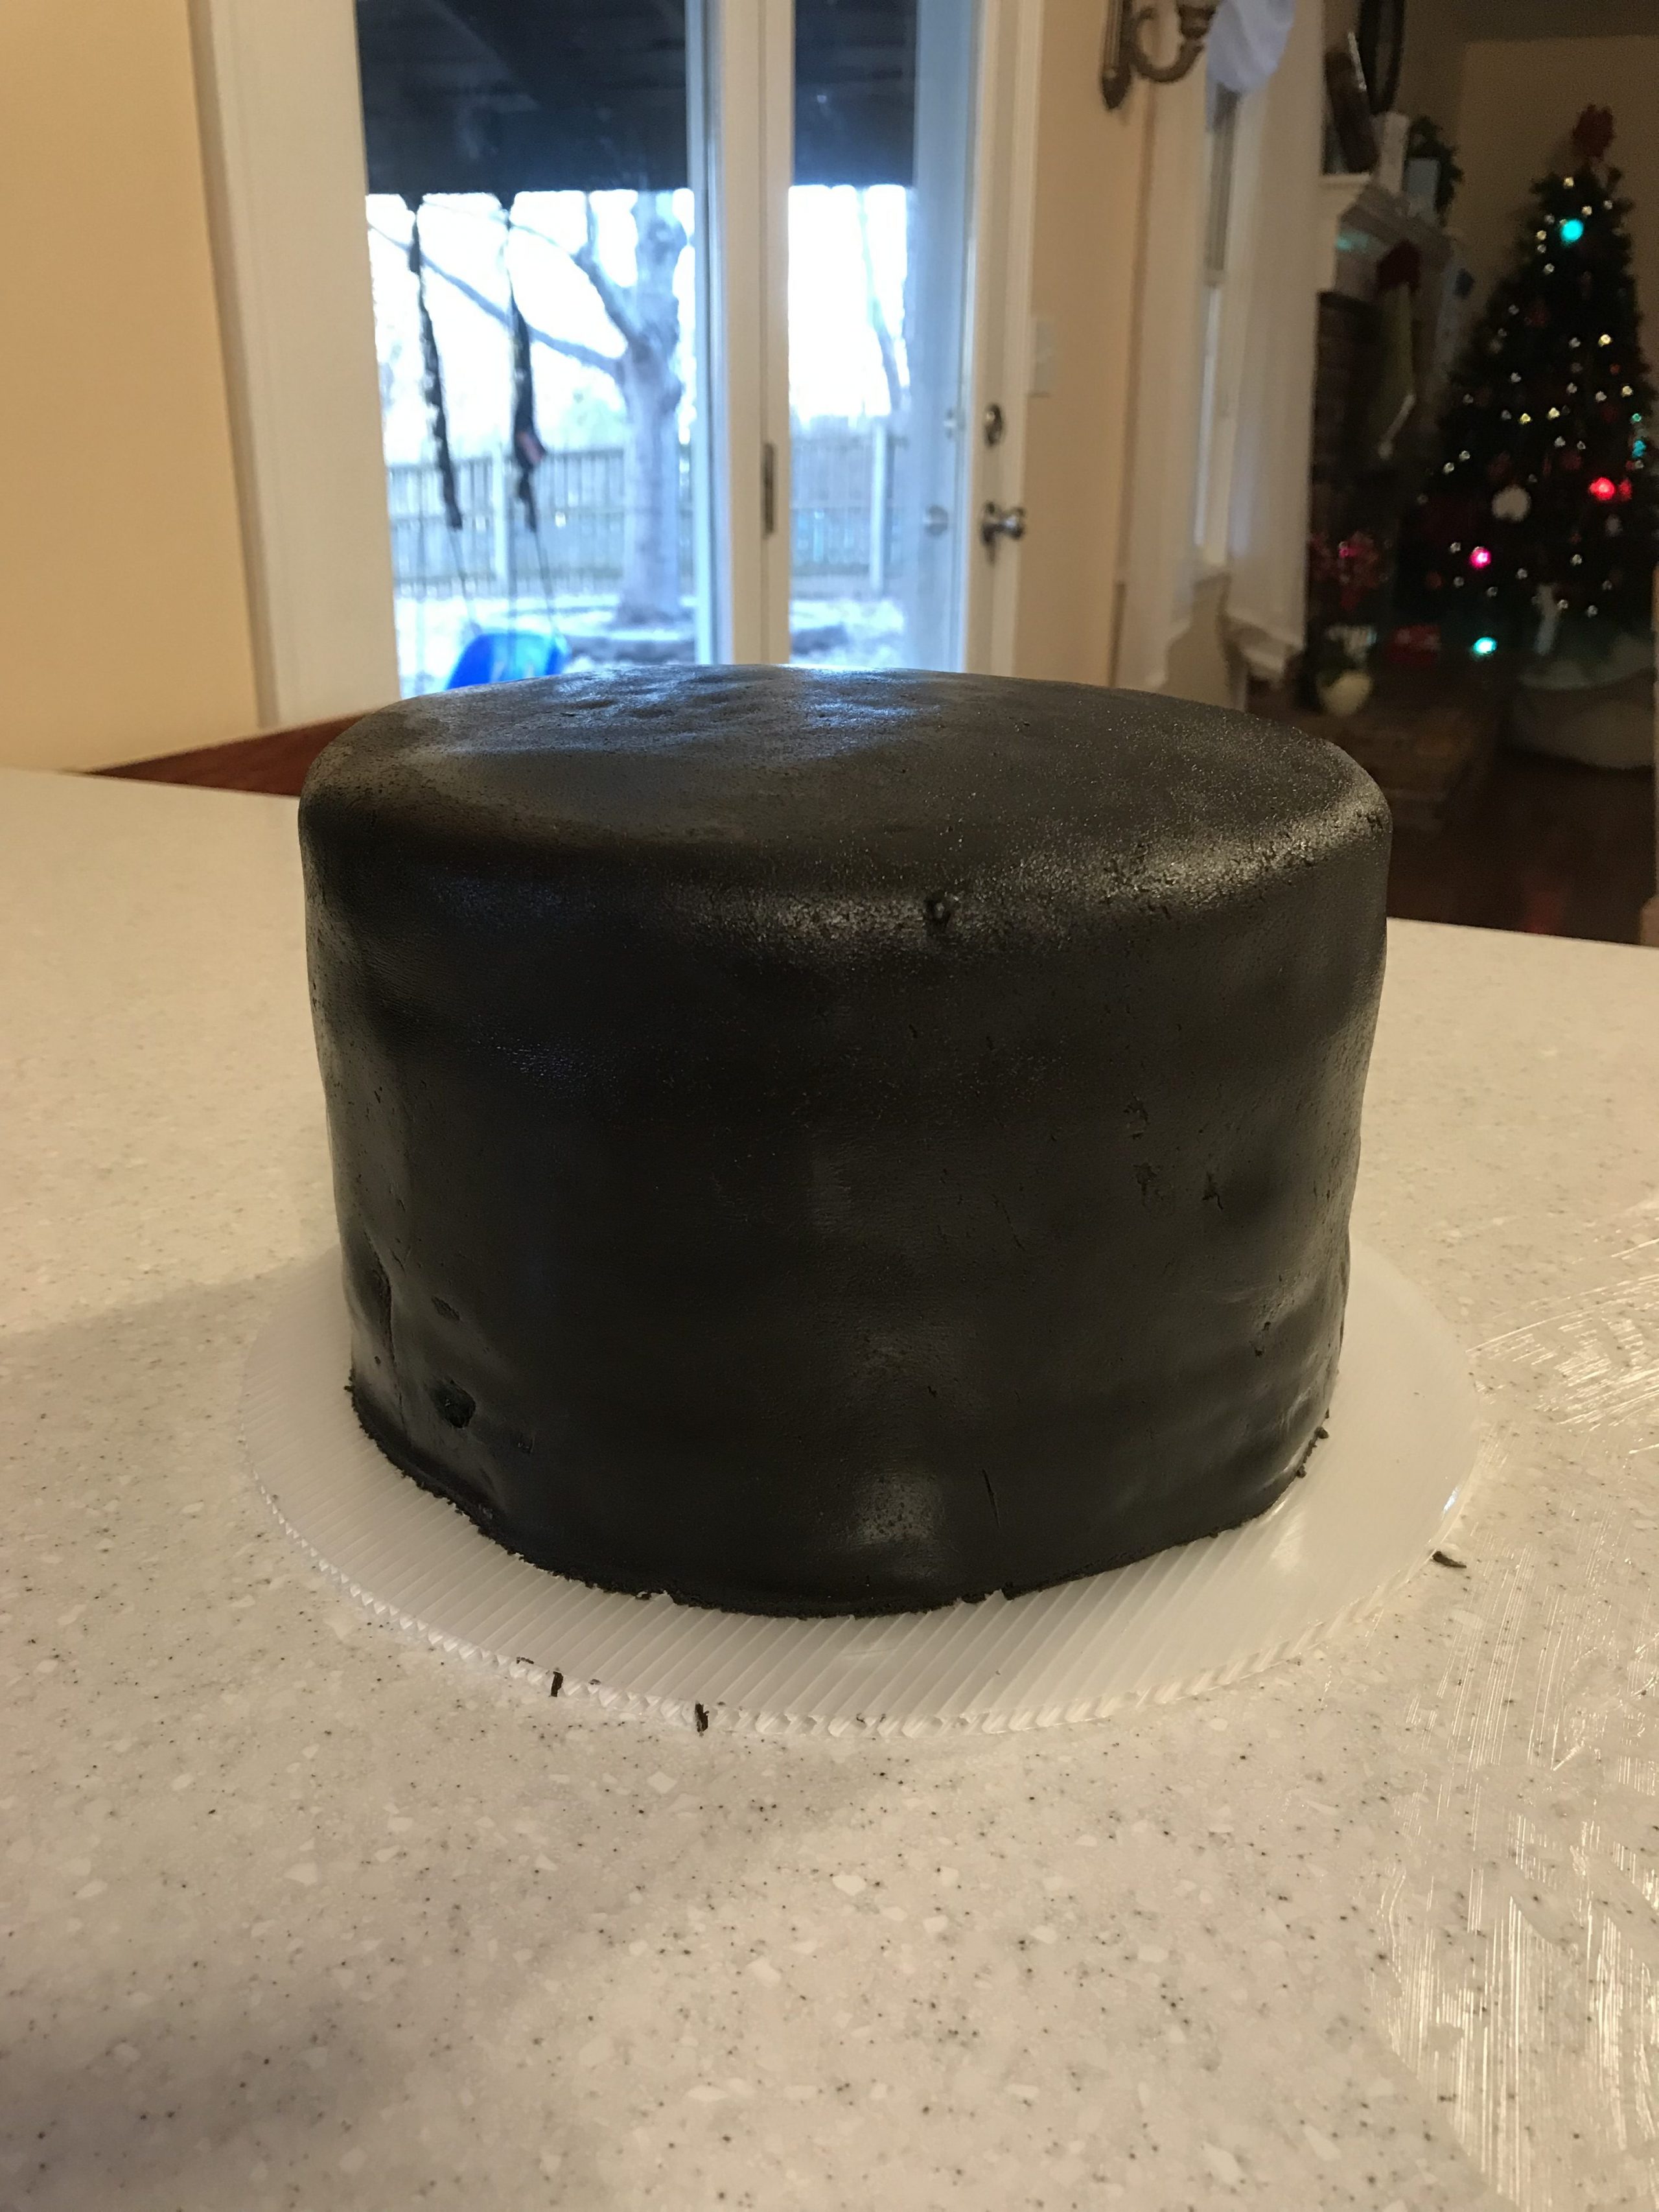 Allen's Tire Birthday Cake | Learn how to decorate a cake using only gluten free ingredients. I made this vanilla cake decorated in a tire tread pattern for my son's first birthday. | eatsomethingdelicious.com